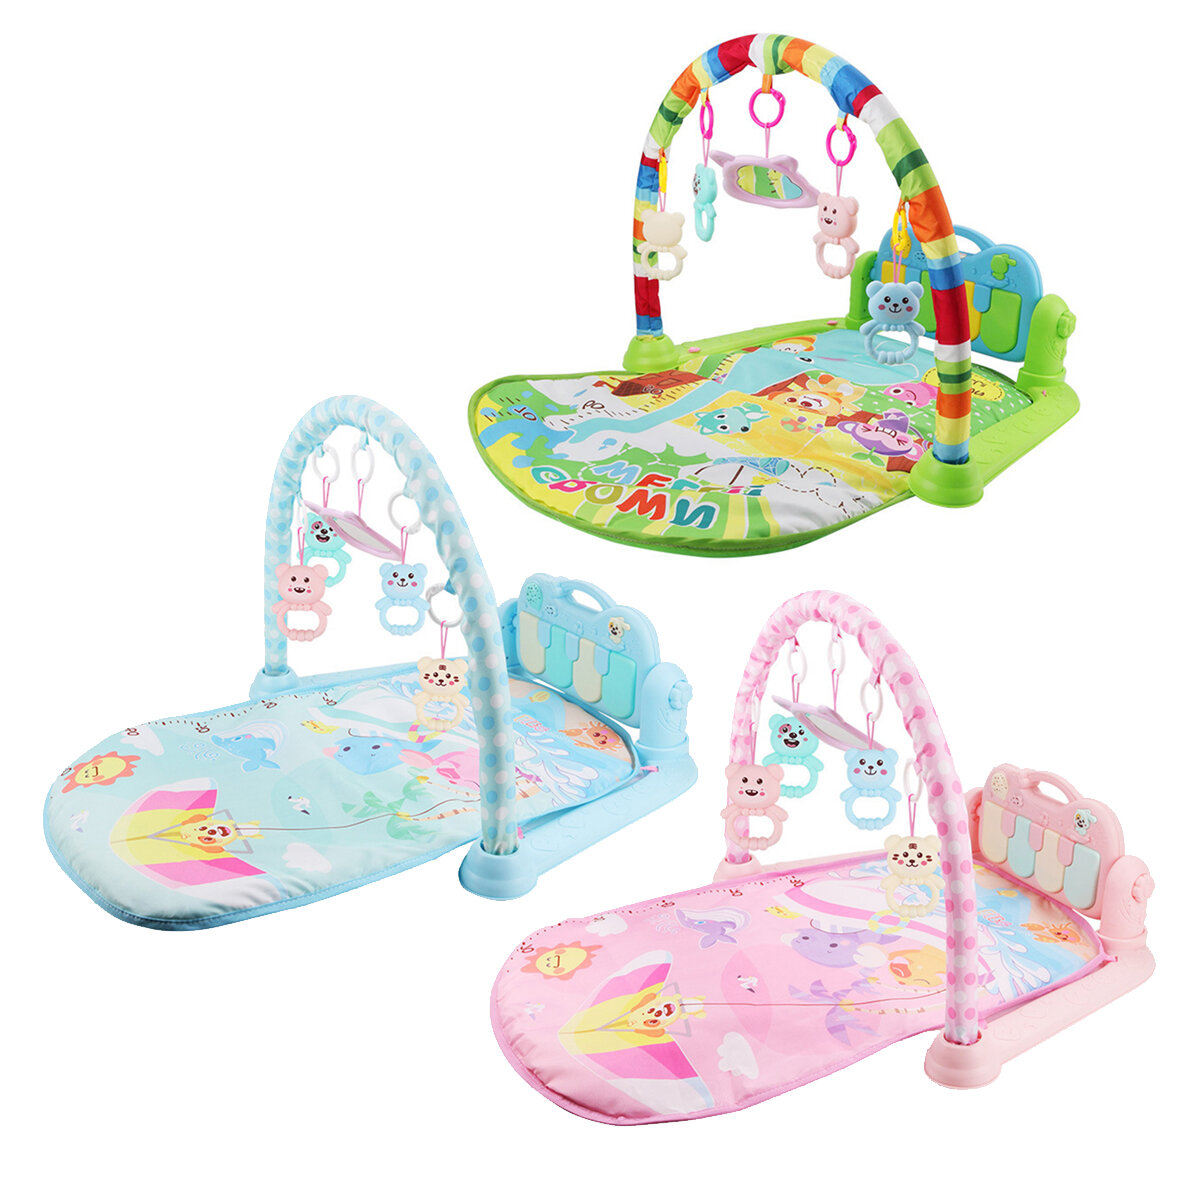 Baby Infant Gym Play Mat Fitness Carpet Music Fun Piano Pedal Educational Toys